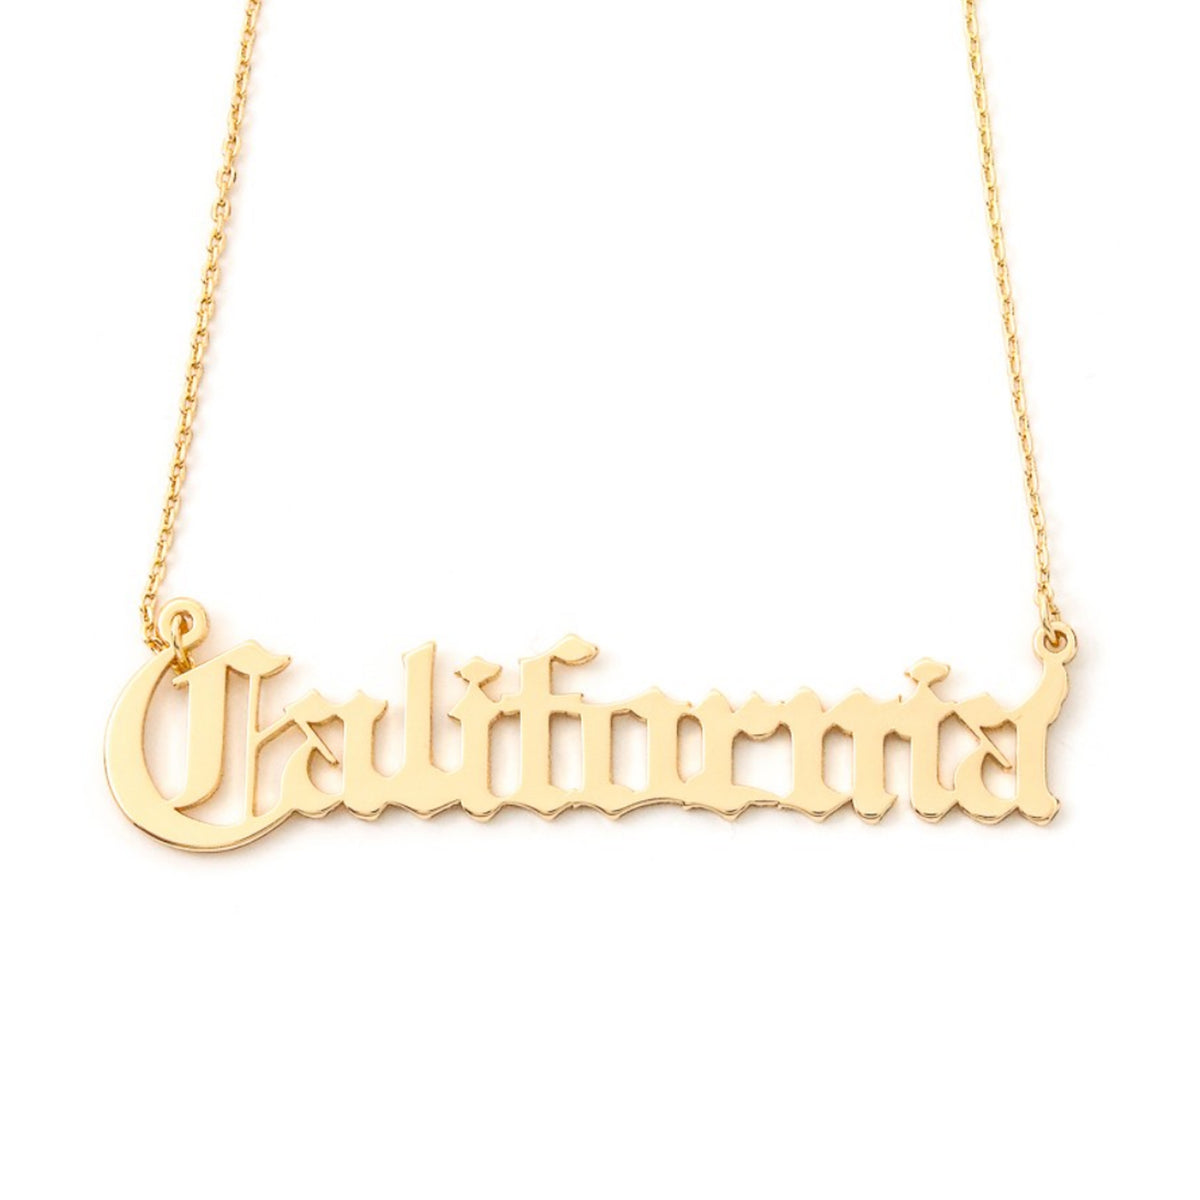 California Old English Necklace